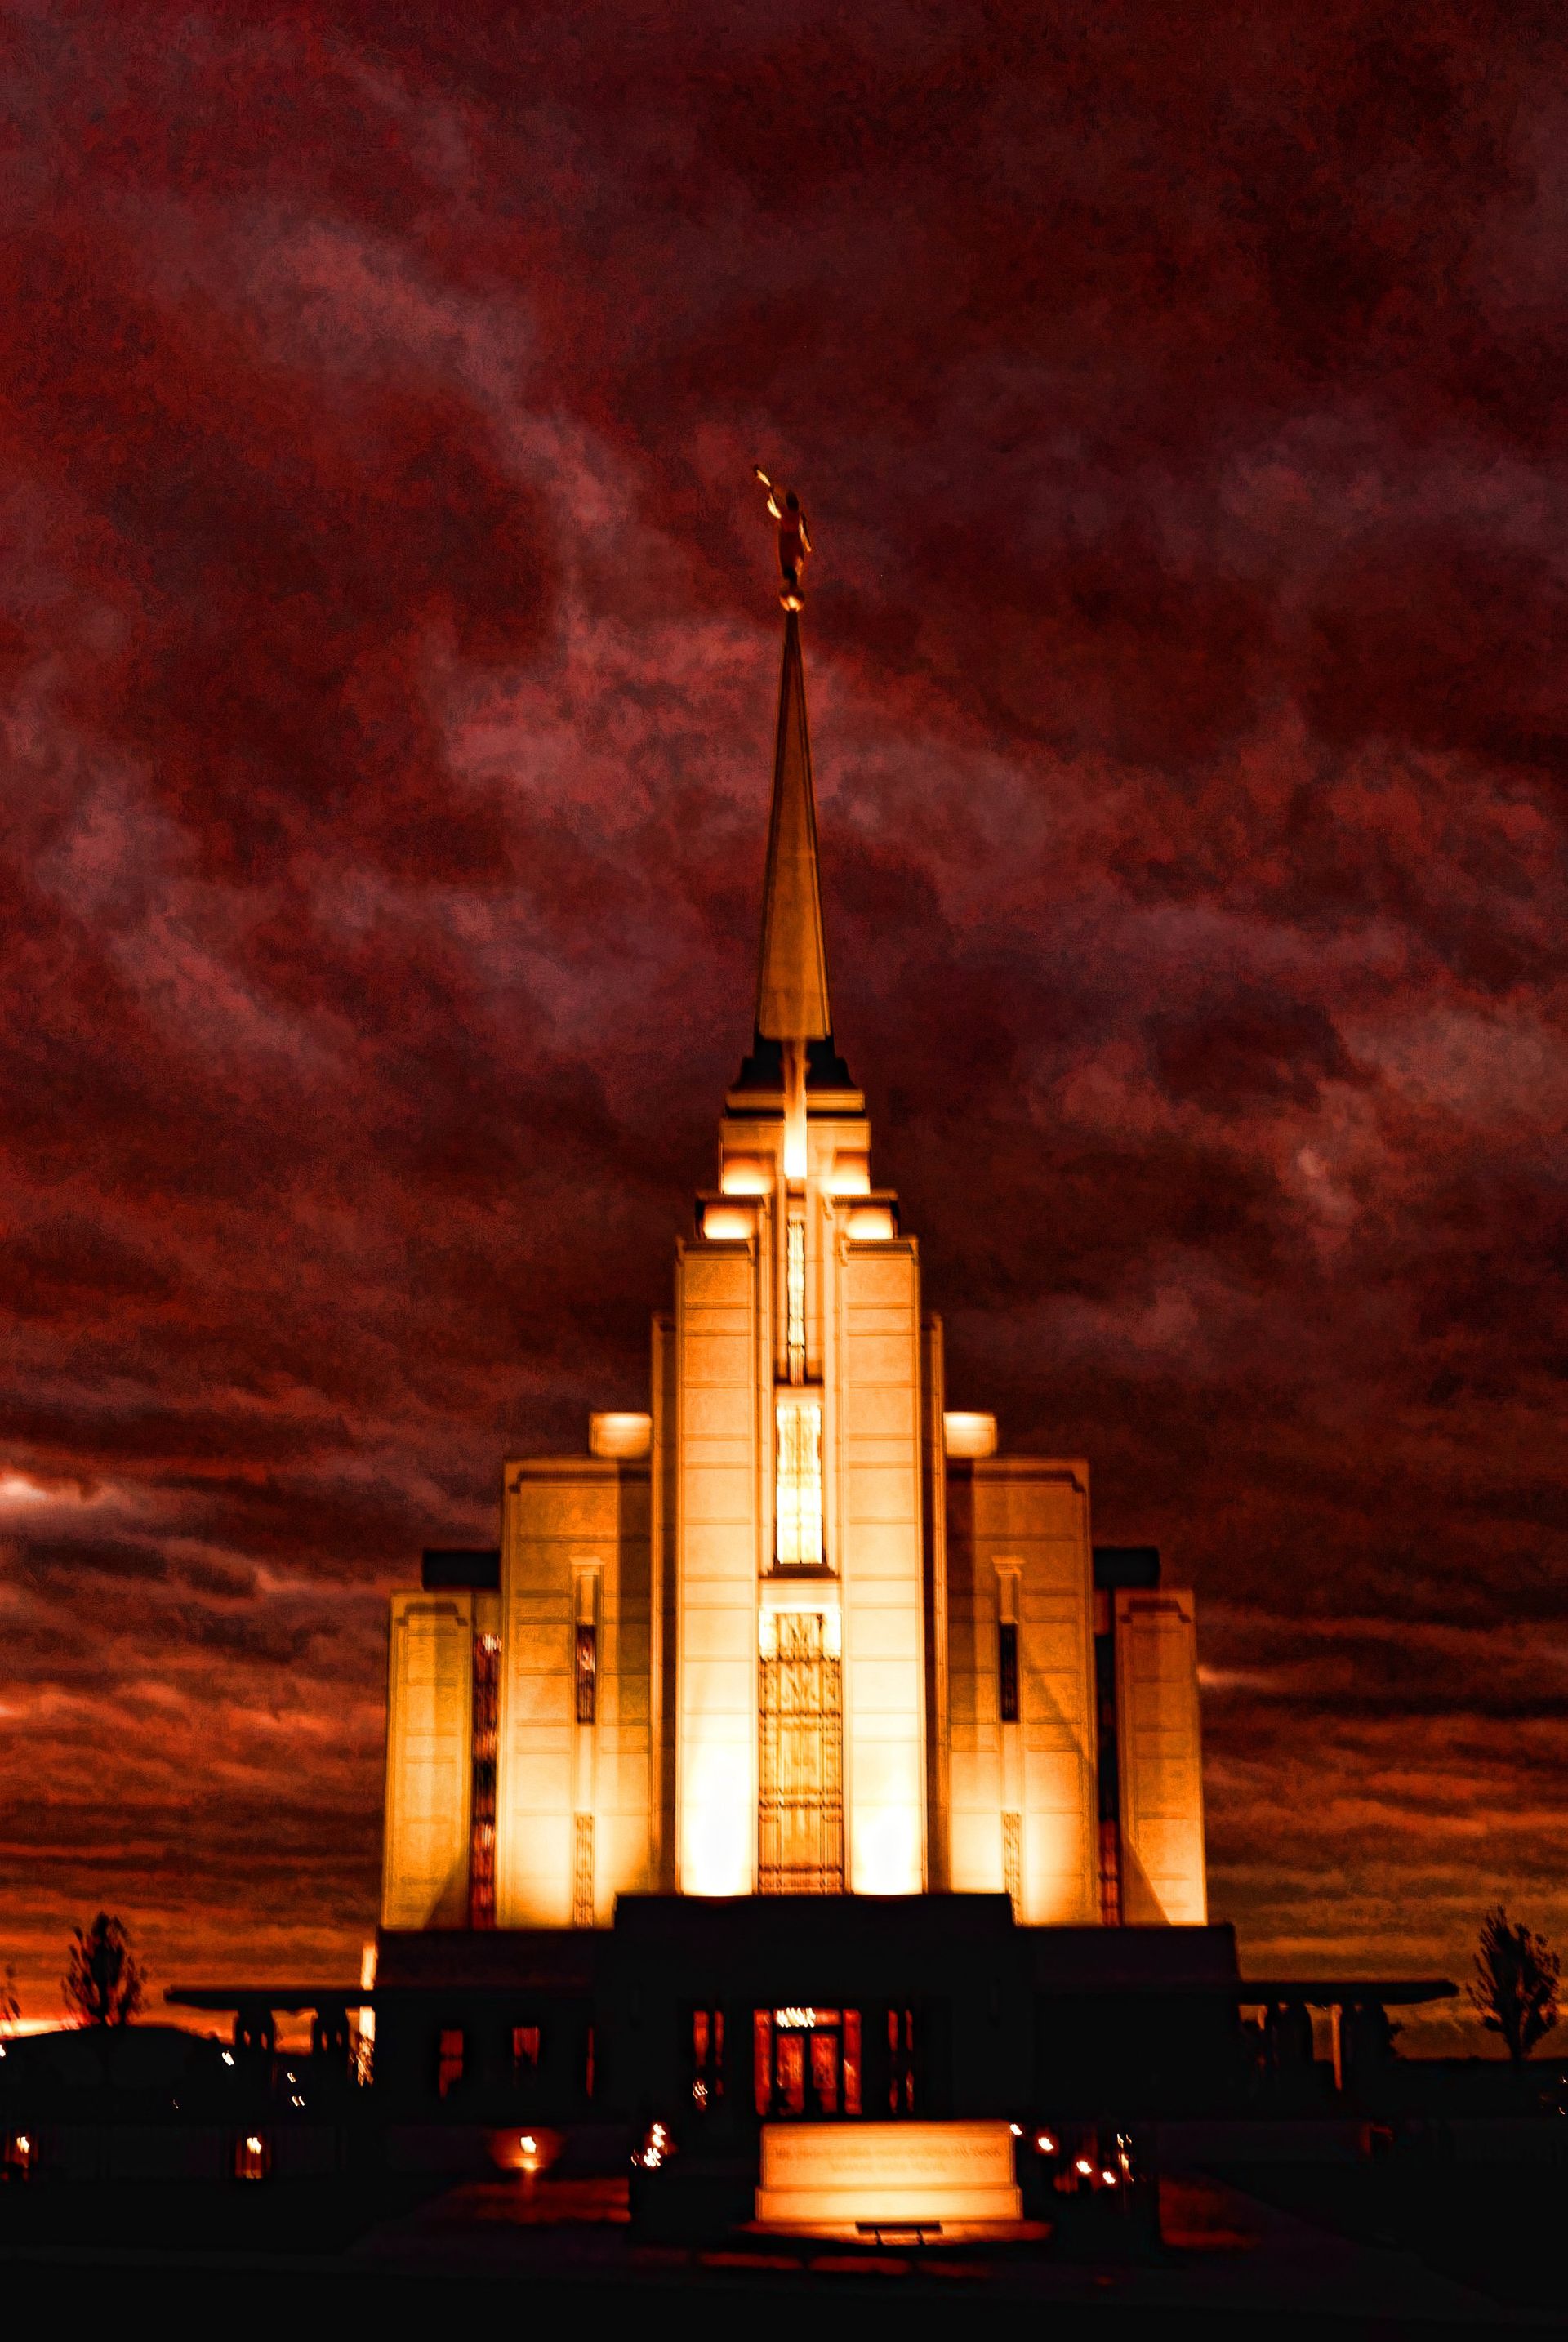 The Rexburg Idaho Temple in the evening during a storm, including the name sign.